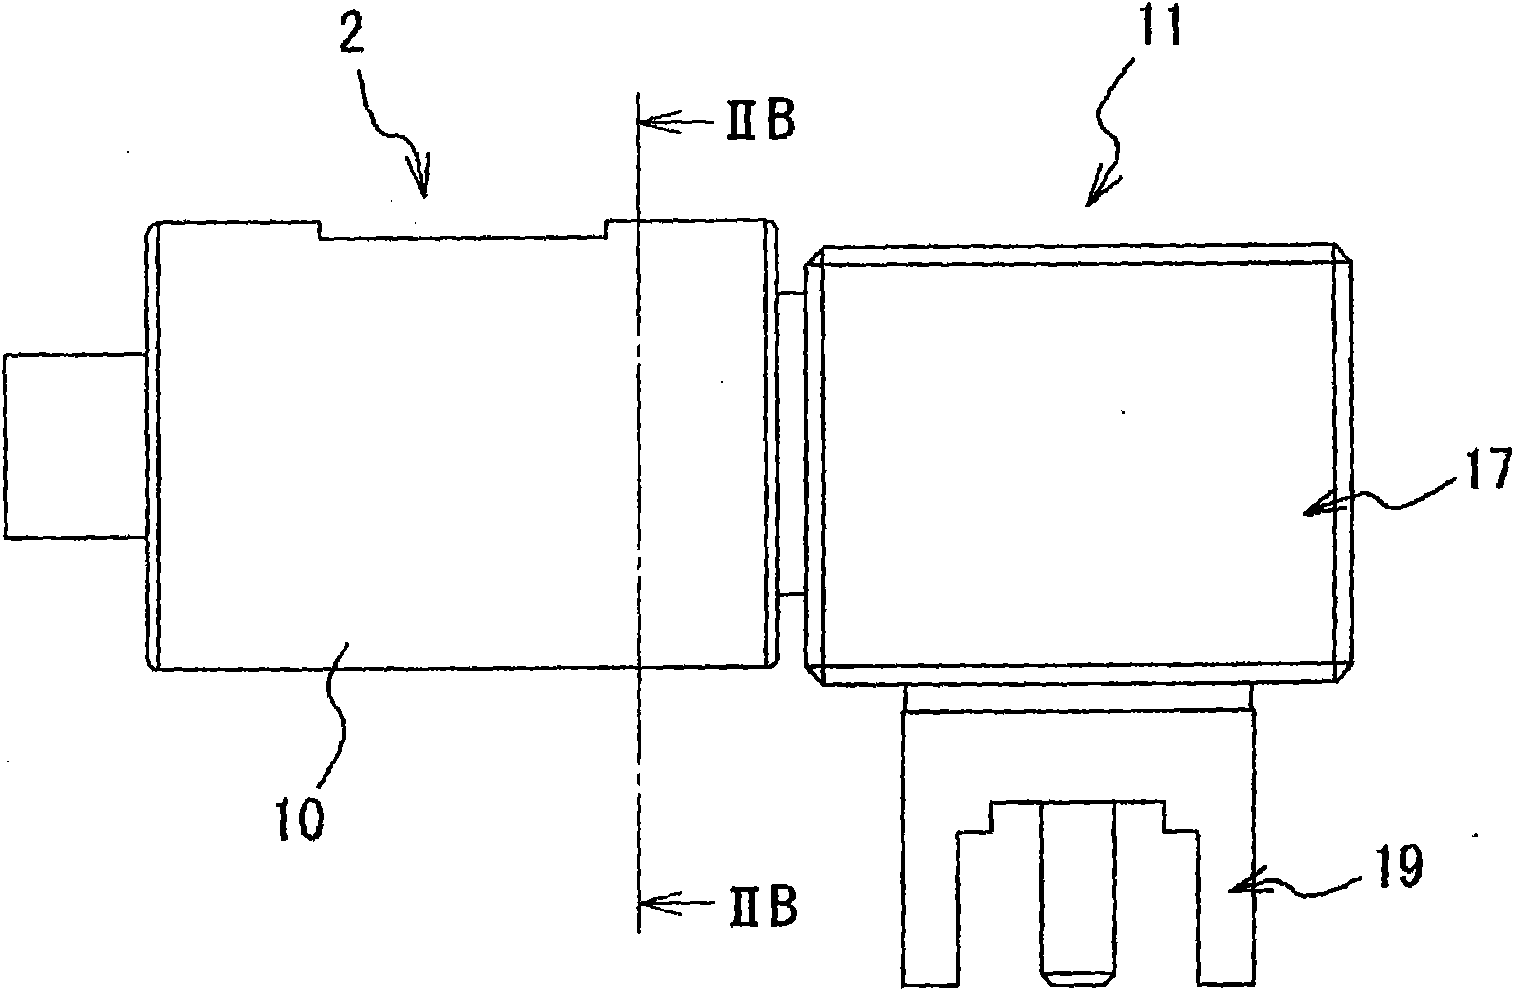 Coaxial connector and coaxial connector with antenna